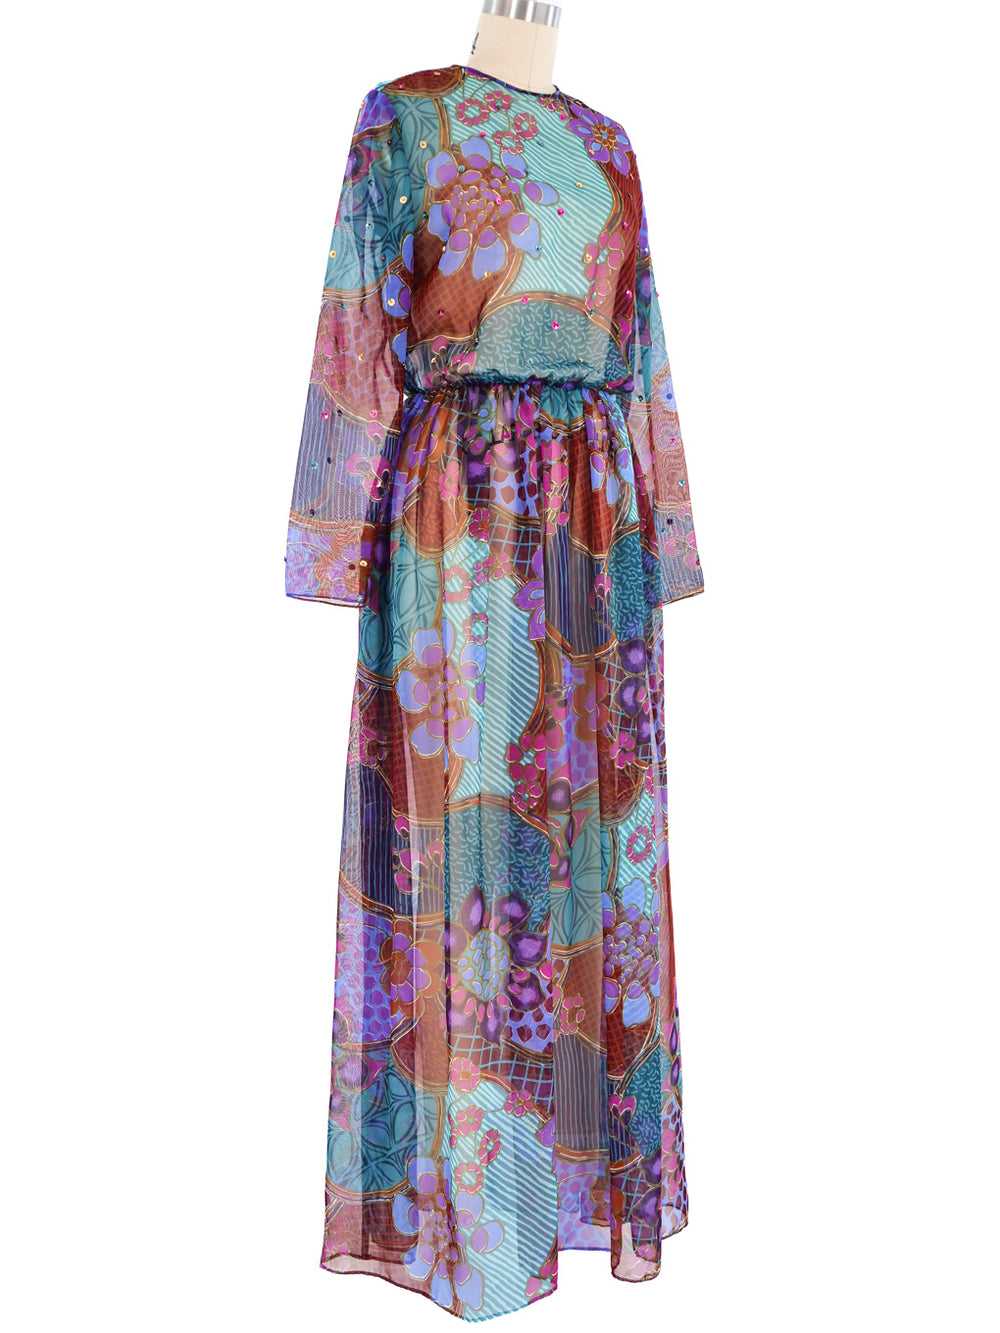 Sequined Floral Print Sheer Maxi Dress - image 3